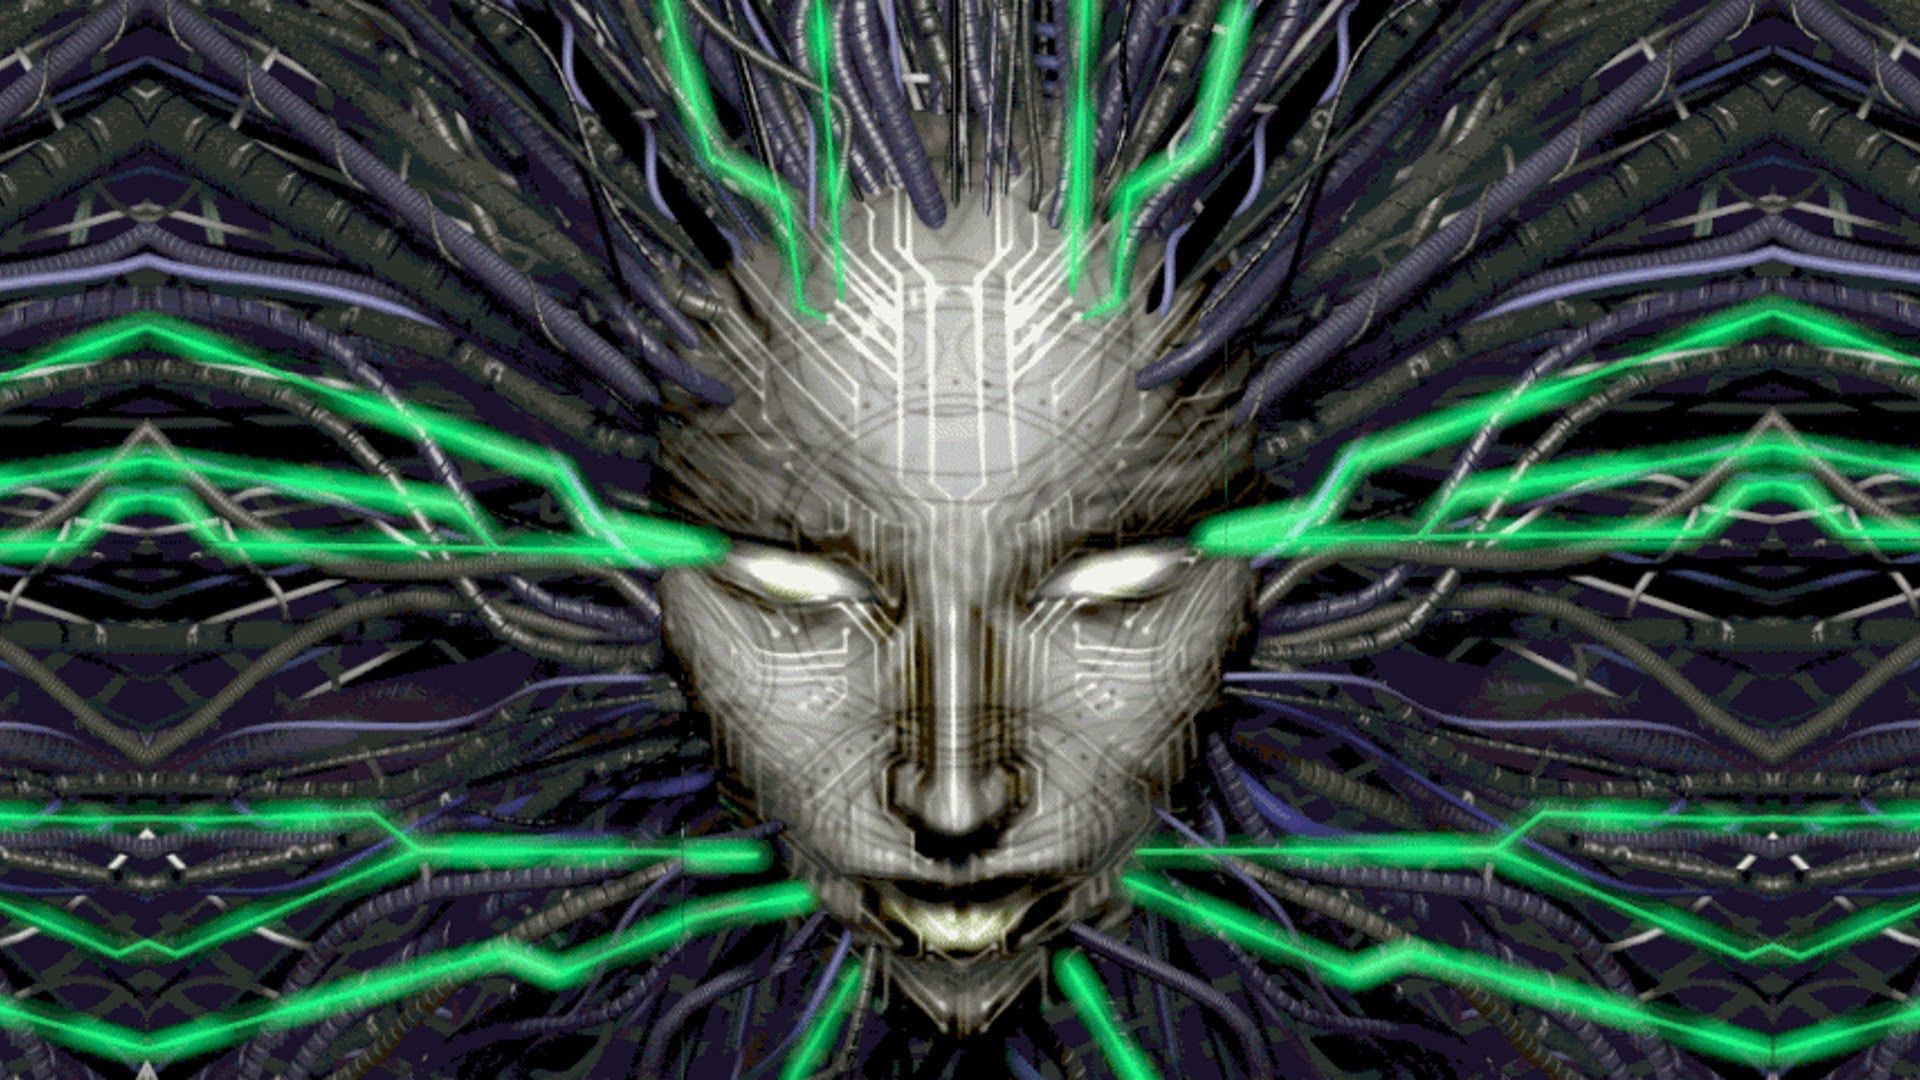 SHODAN Quotes [System Shock 2 Complete] - YouTube